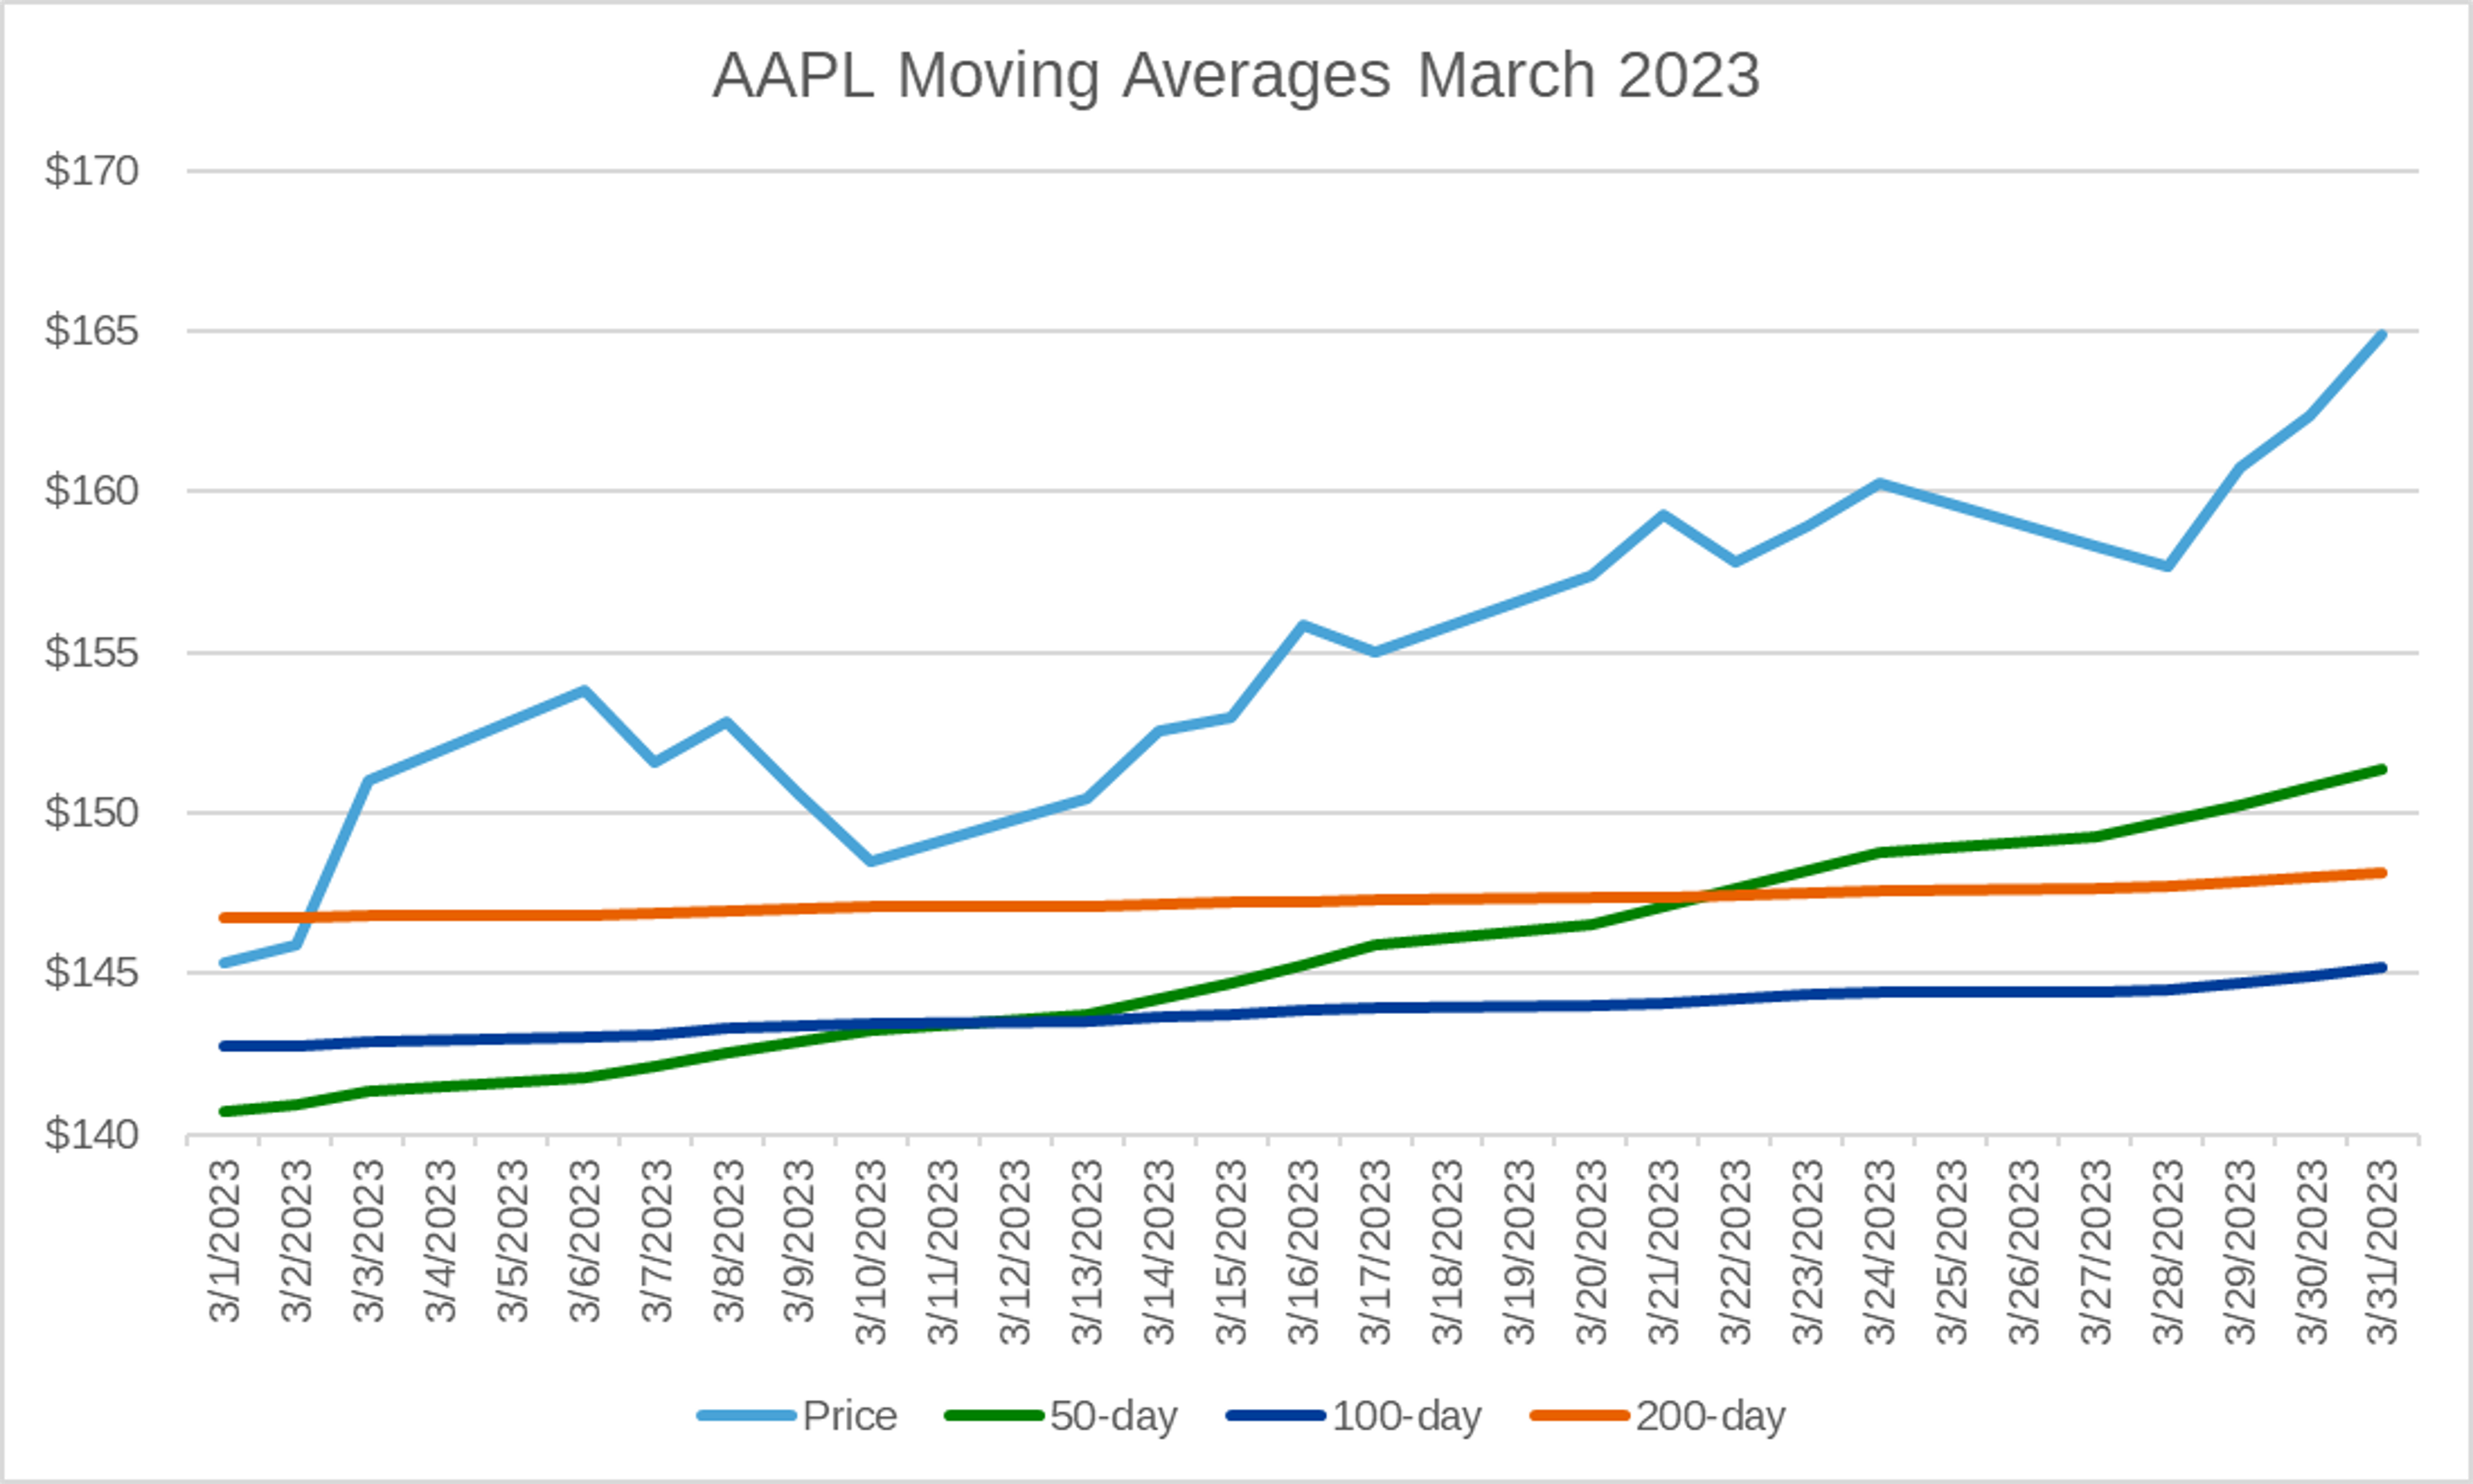 The daily price change, 50-day moving average, 100-day moving average, and 200-day moving average for APPL stock in March 2023 compared in a chart.